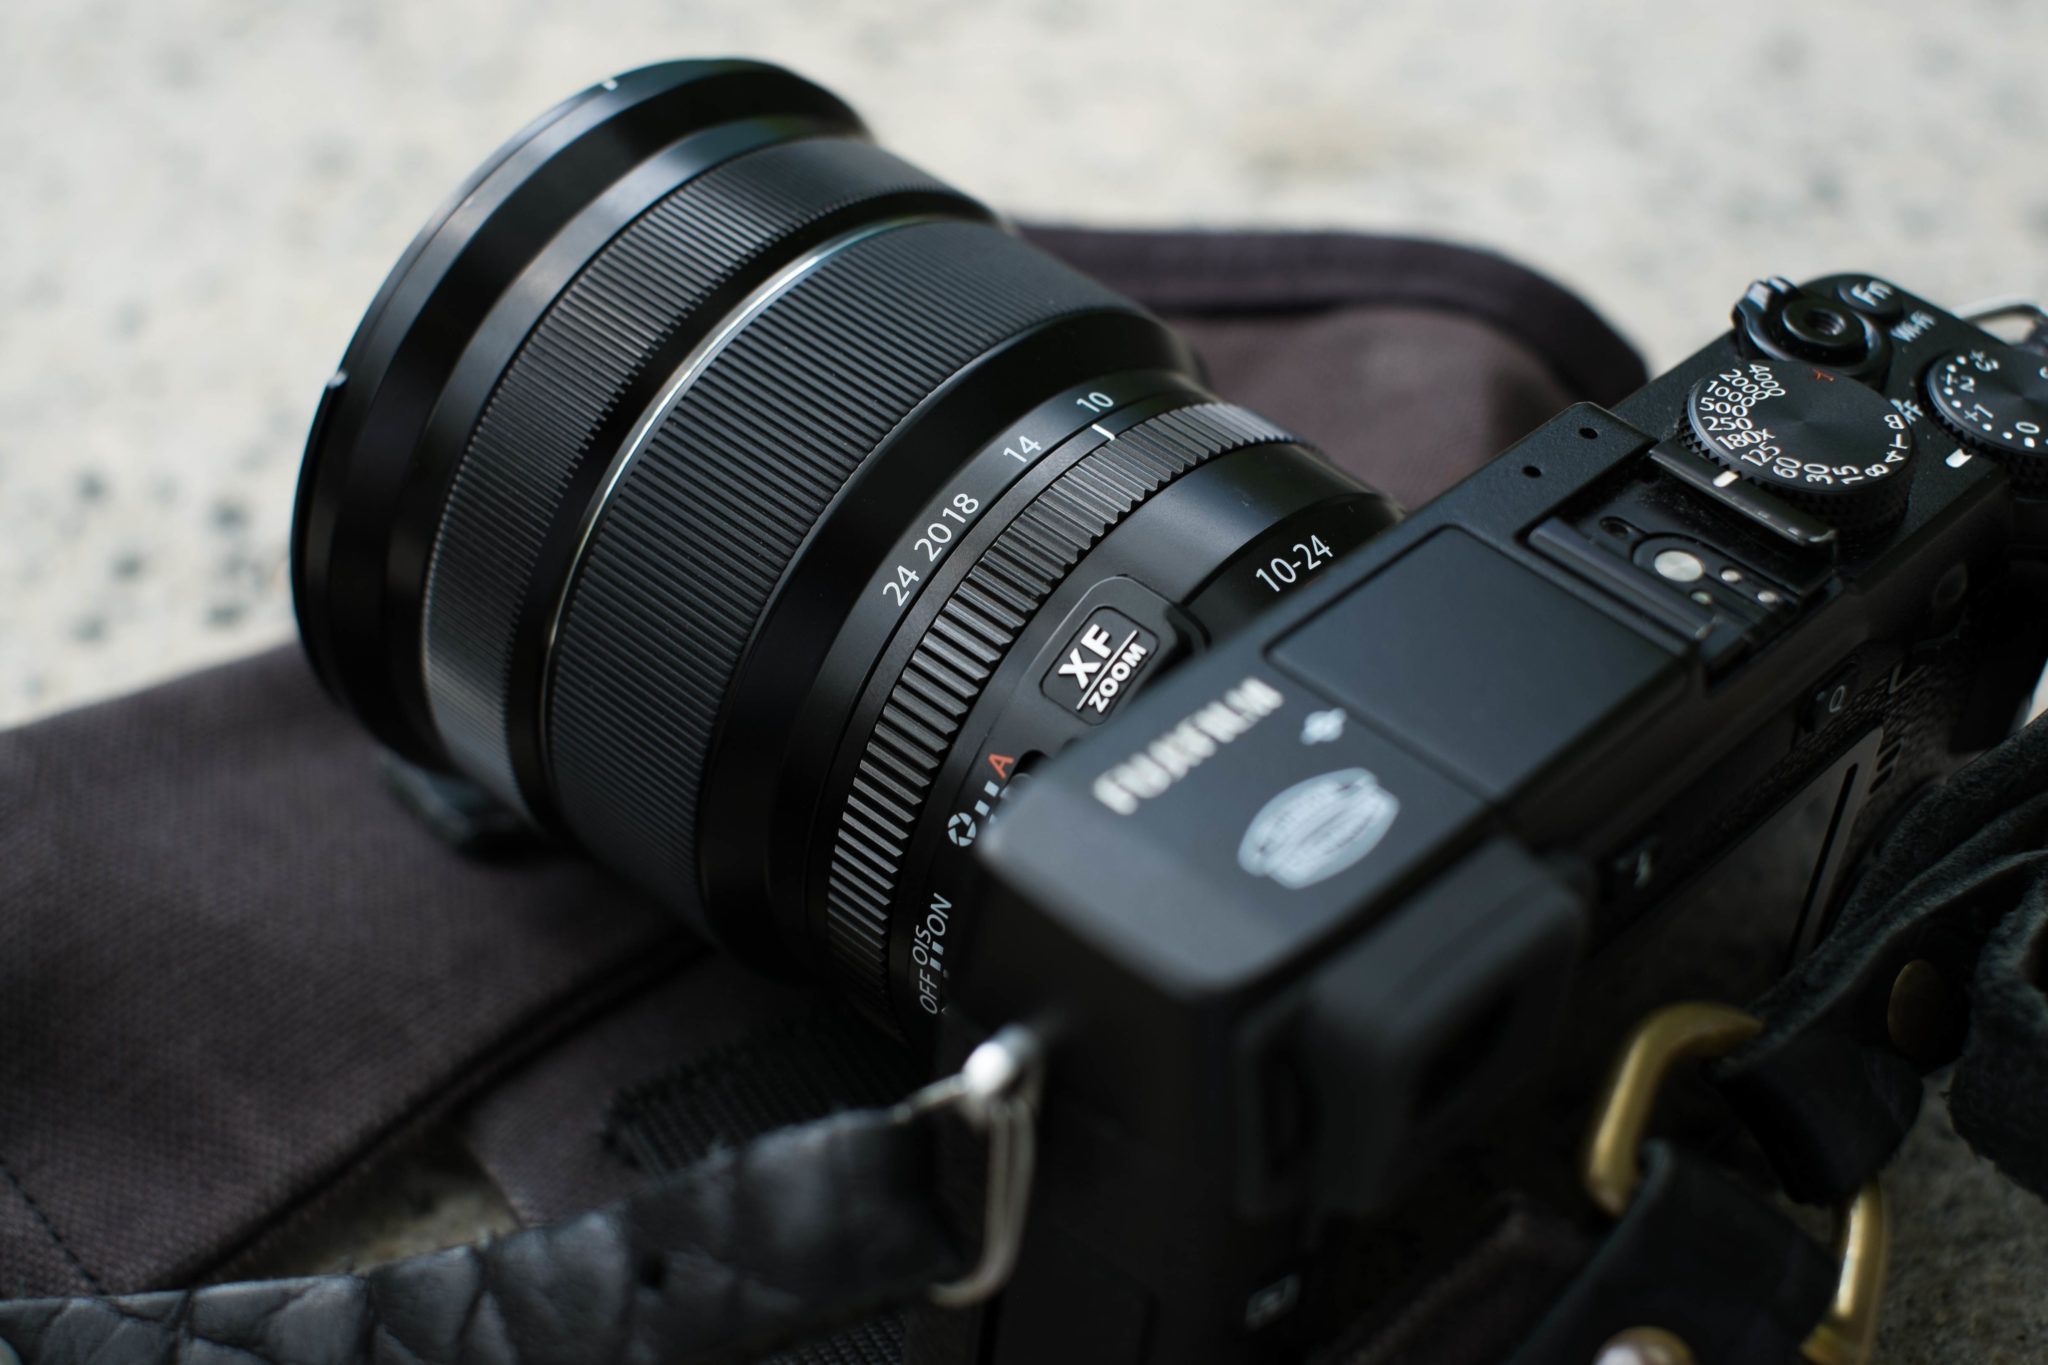 Deal Alert! The Fujifilm 10-24mm F4 R OIS Is Just $699! What a Bargain!